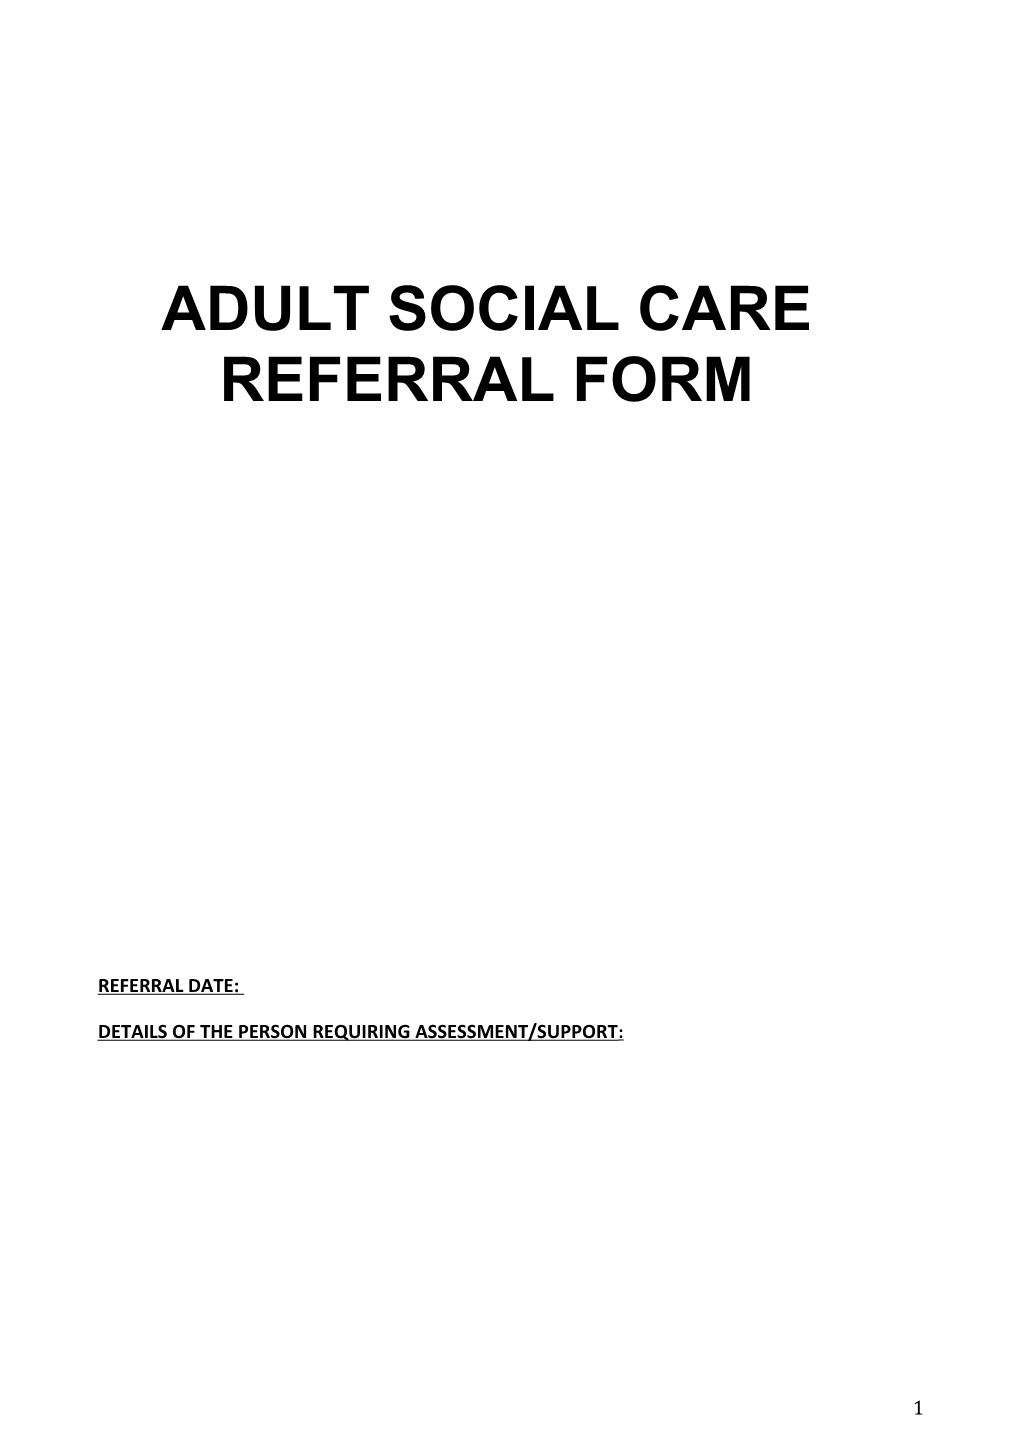 Adult Social Care Referral Form